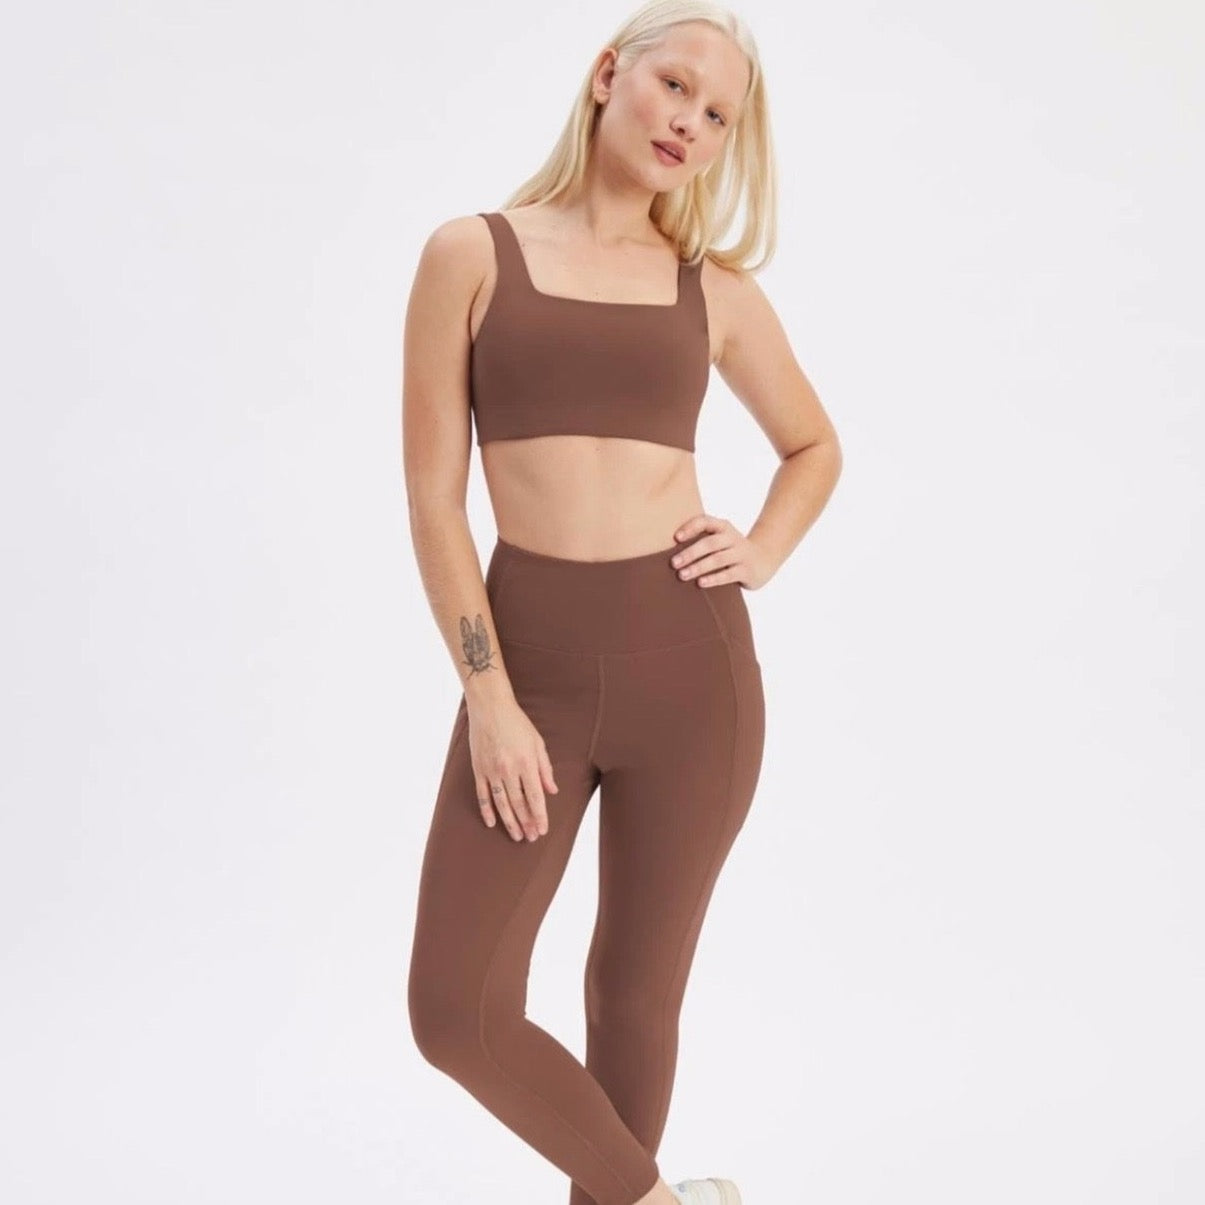 full length compression legging with pockets